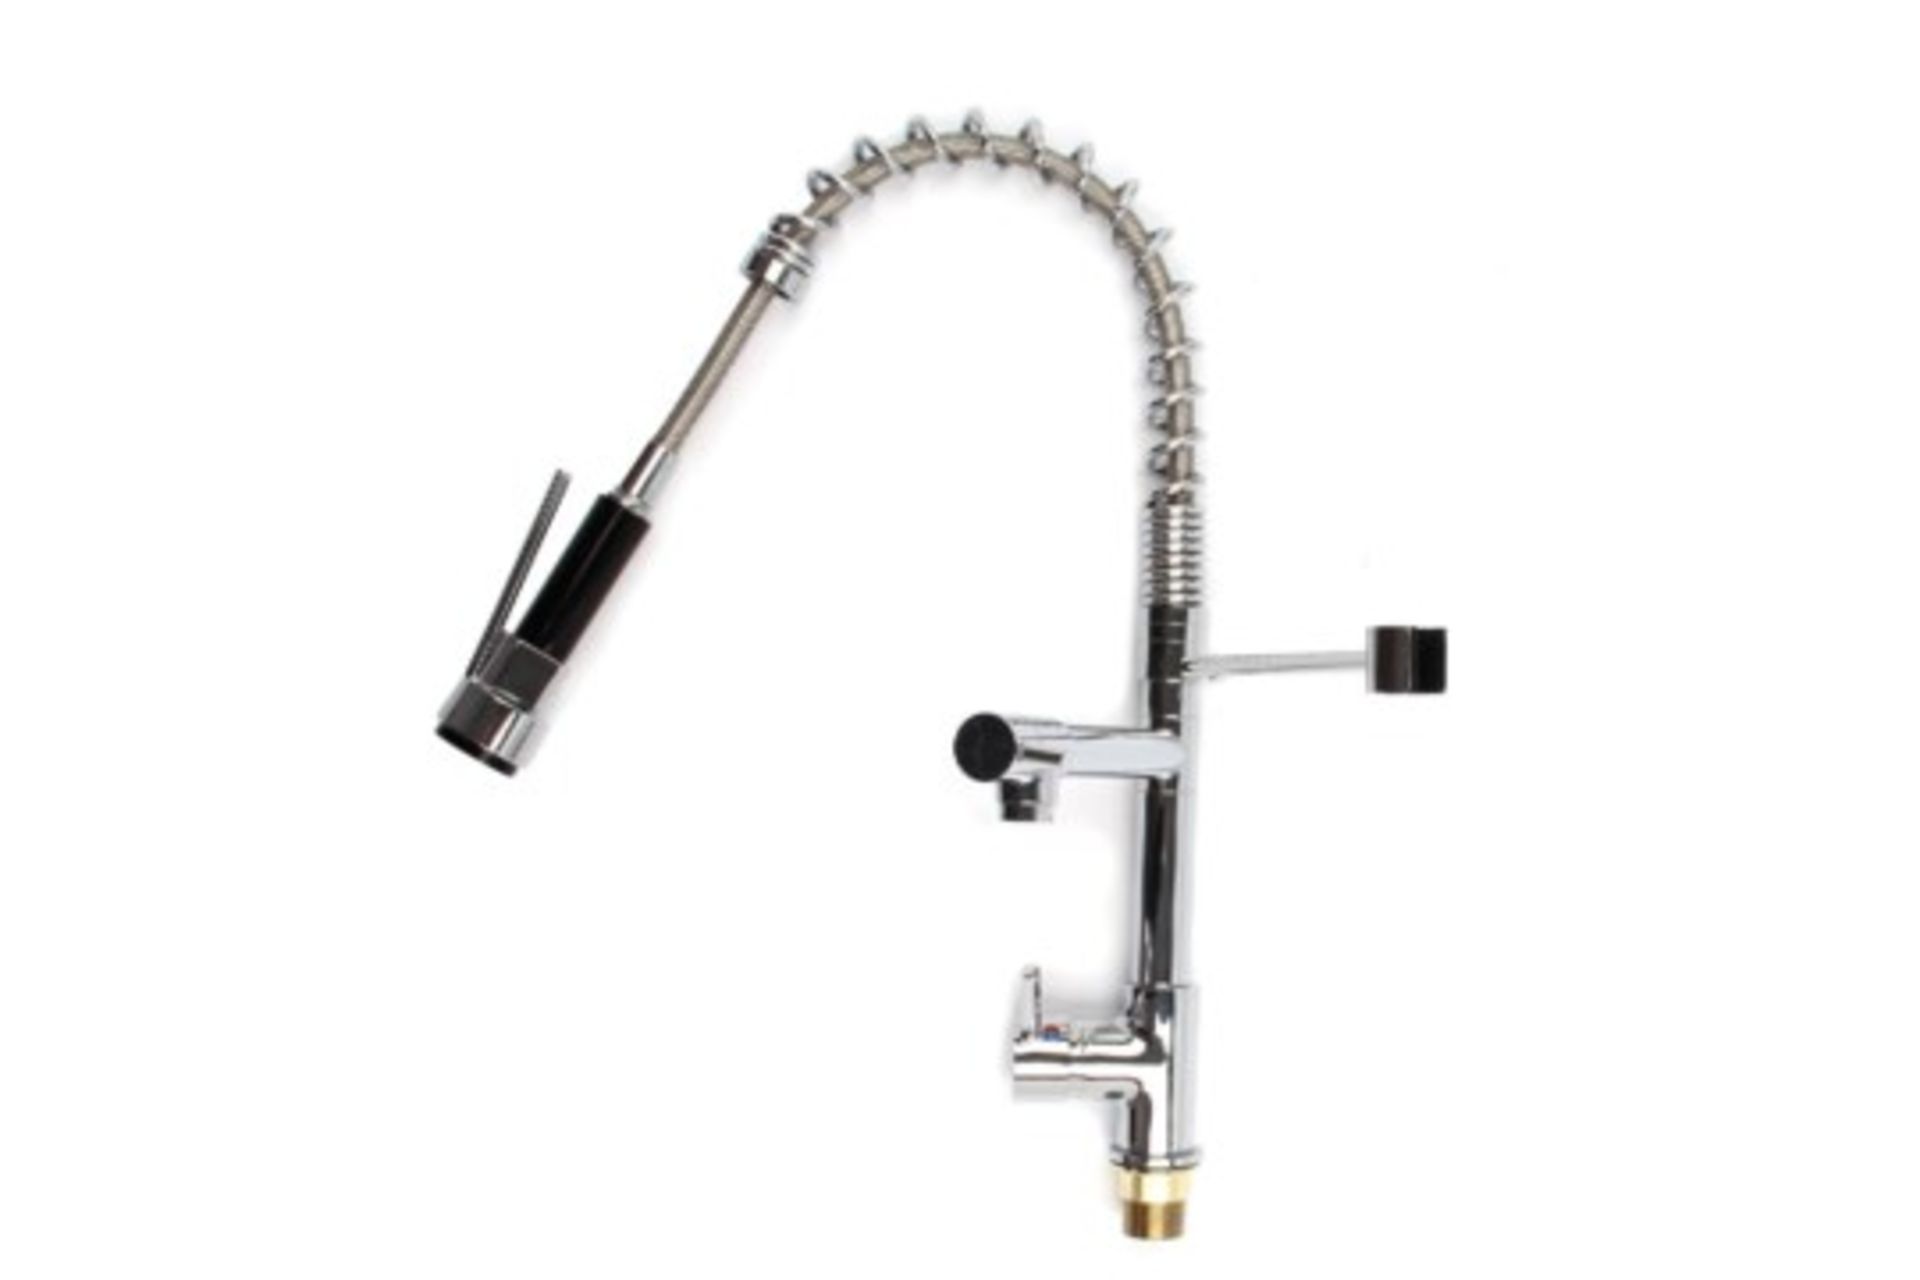 (QW222) Bentley Modern Monobloc Chrome Brass Pull Out Spray Mixer Tap. RRP £349.99. This tap is from - Bild 2 aus 3